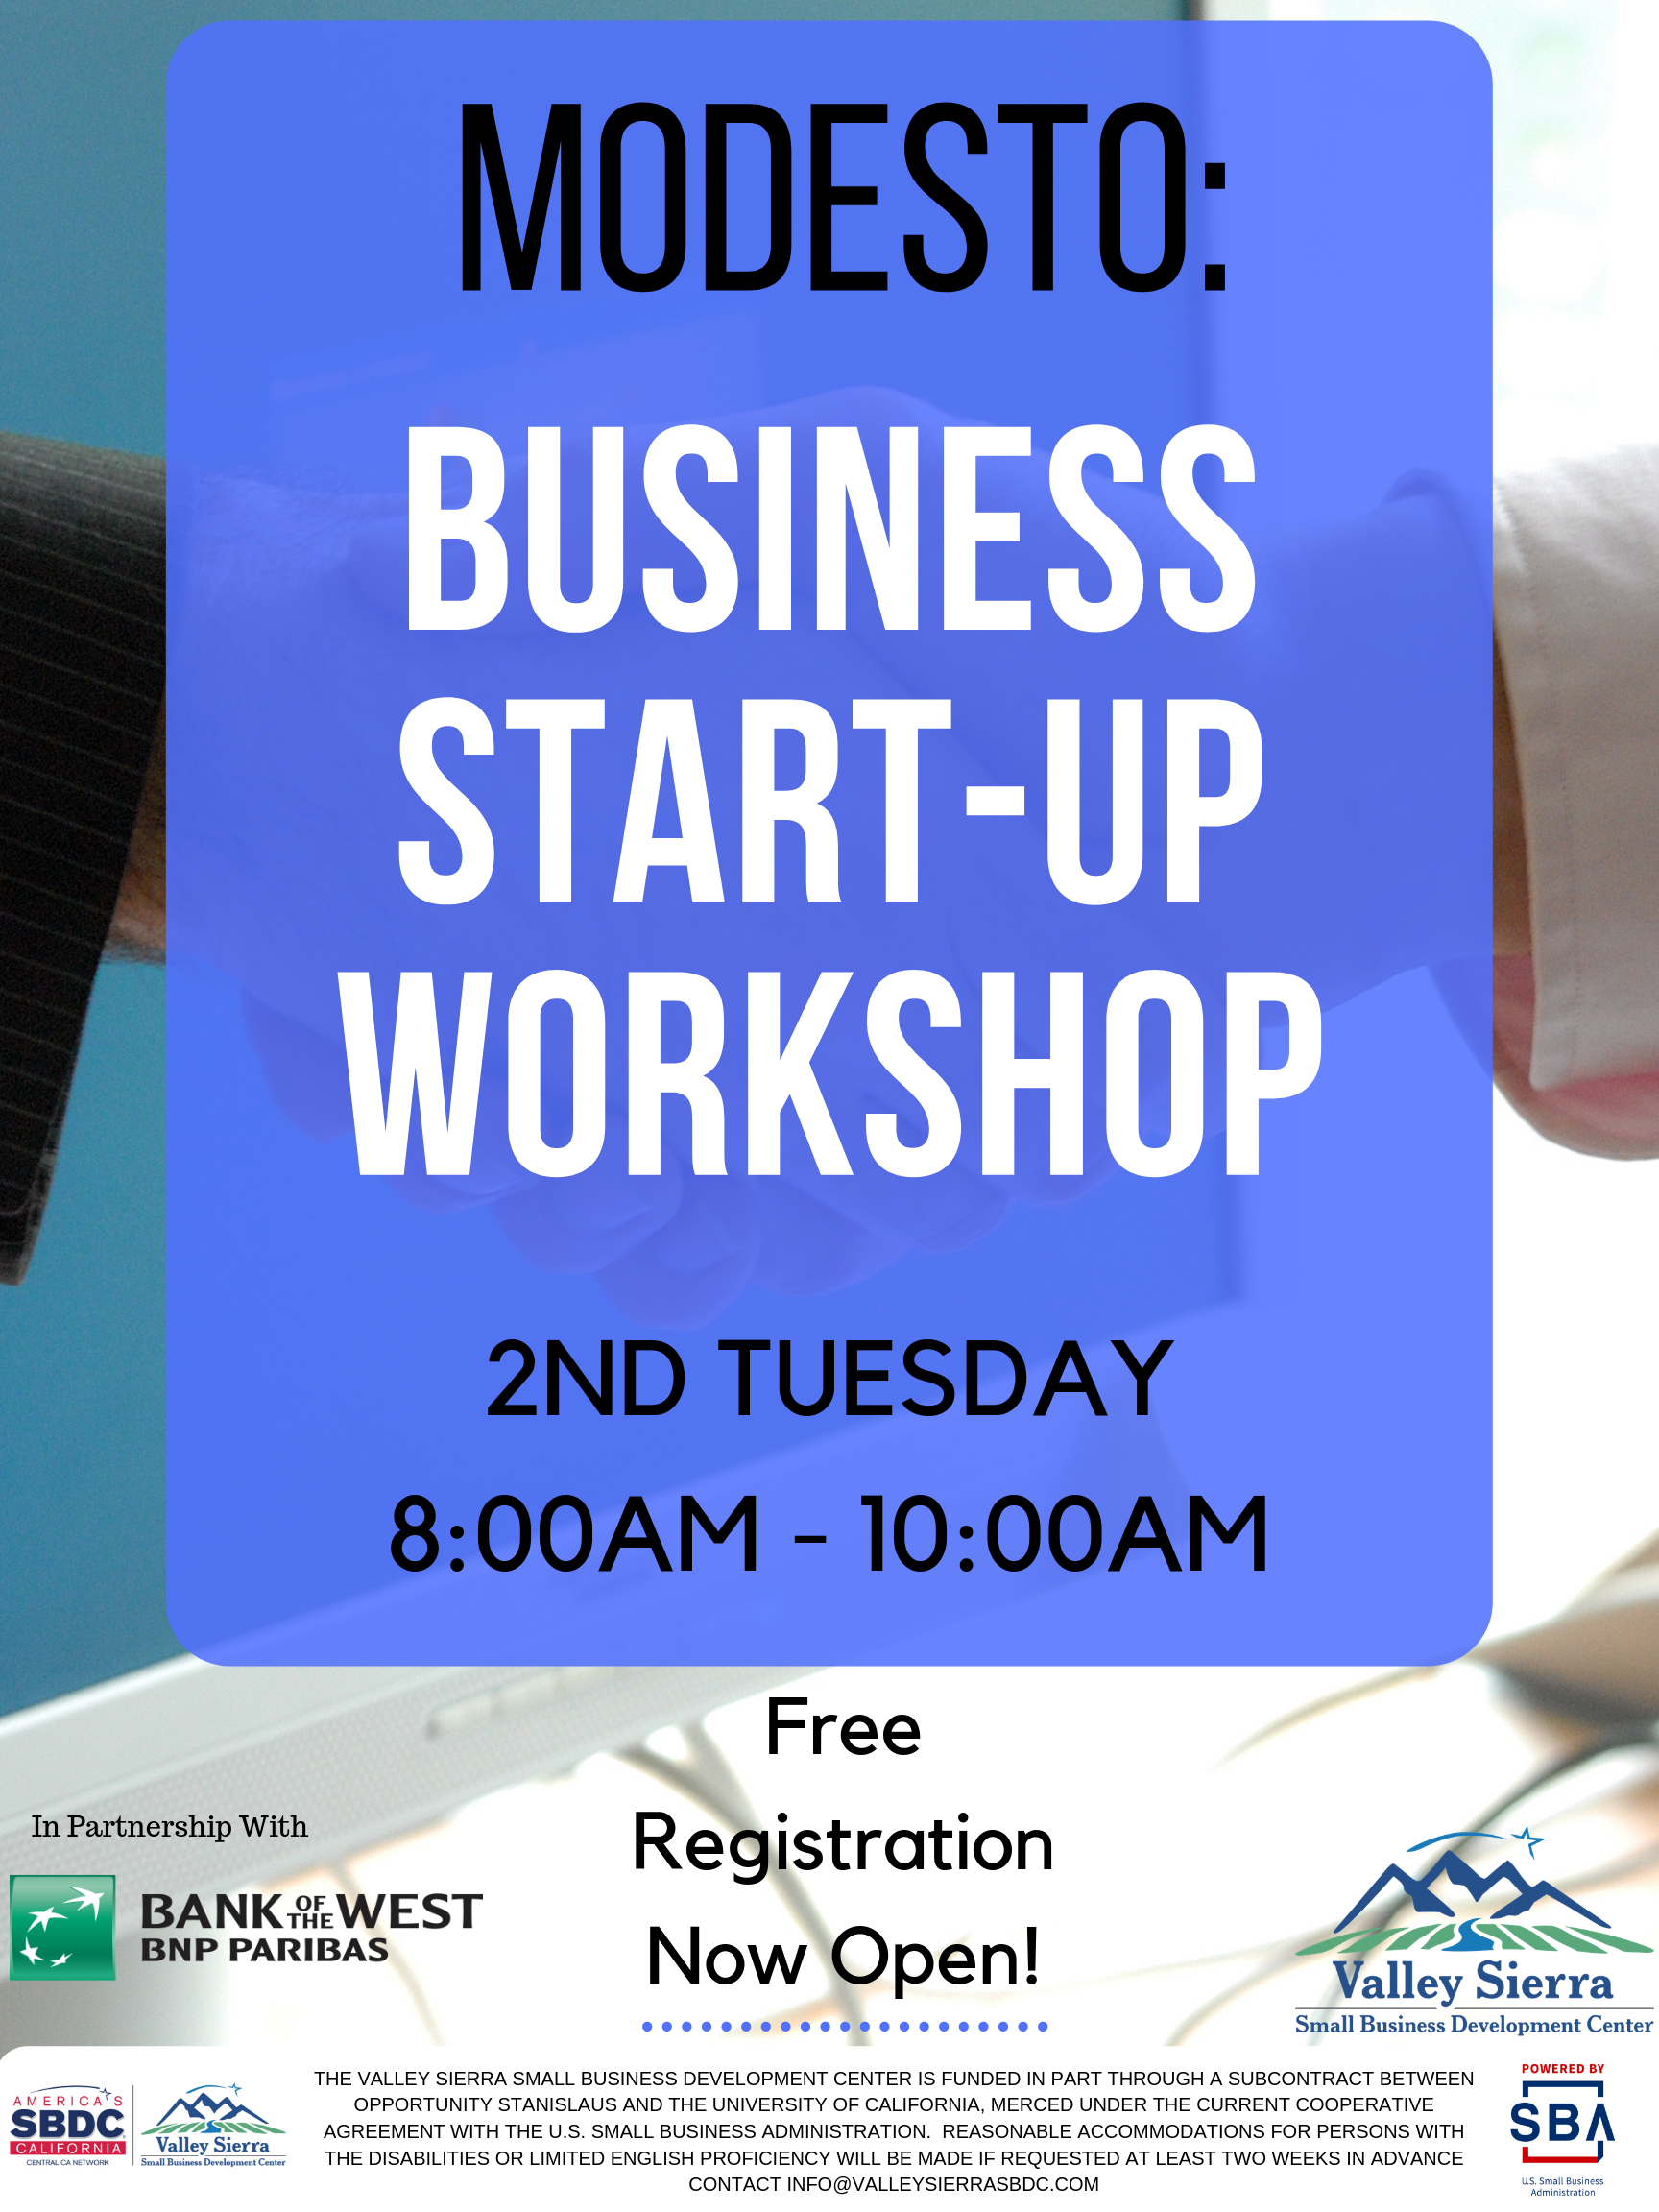 Event Flyer, Modesto: Business Start-Up Workshop, 2nd Tuesday, 8:00am - 10:00am. Free Registration Now Open! Tuesday, October 8th, 2019 at the Valley Sierra SBDC. 1625 I Street, Modesto, Ca.